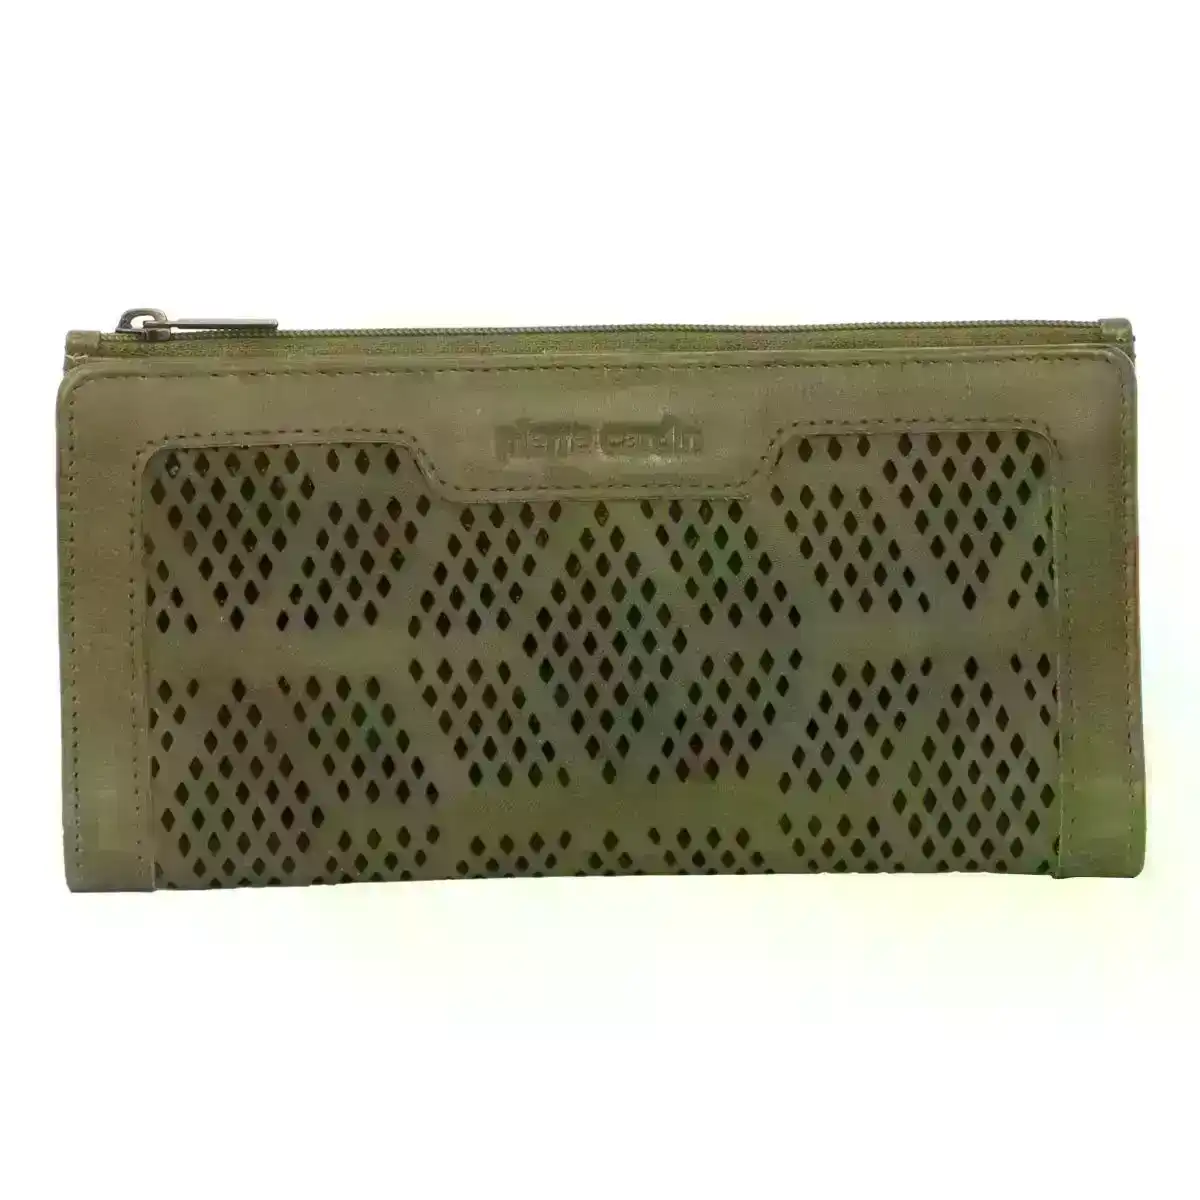 Pierre Cardin Perforated Leather Ladies Handy Travel Wallet - Olive